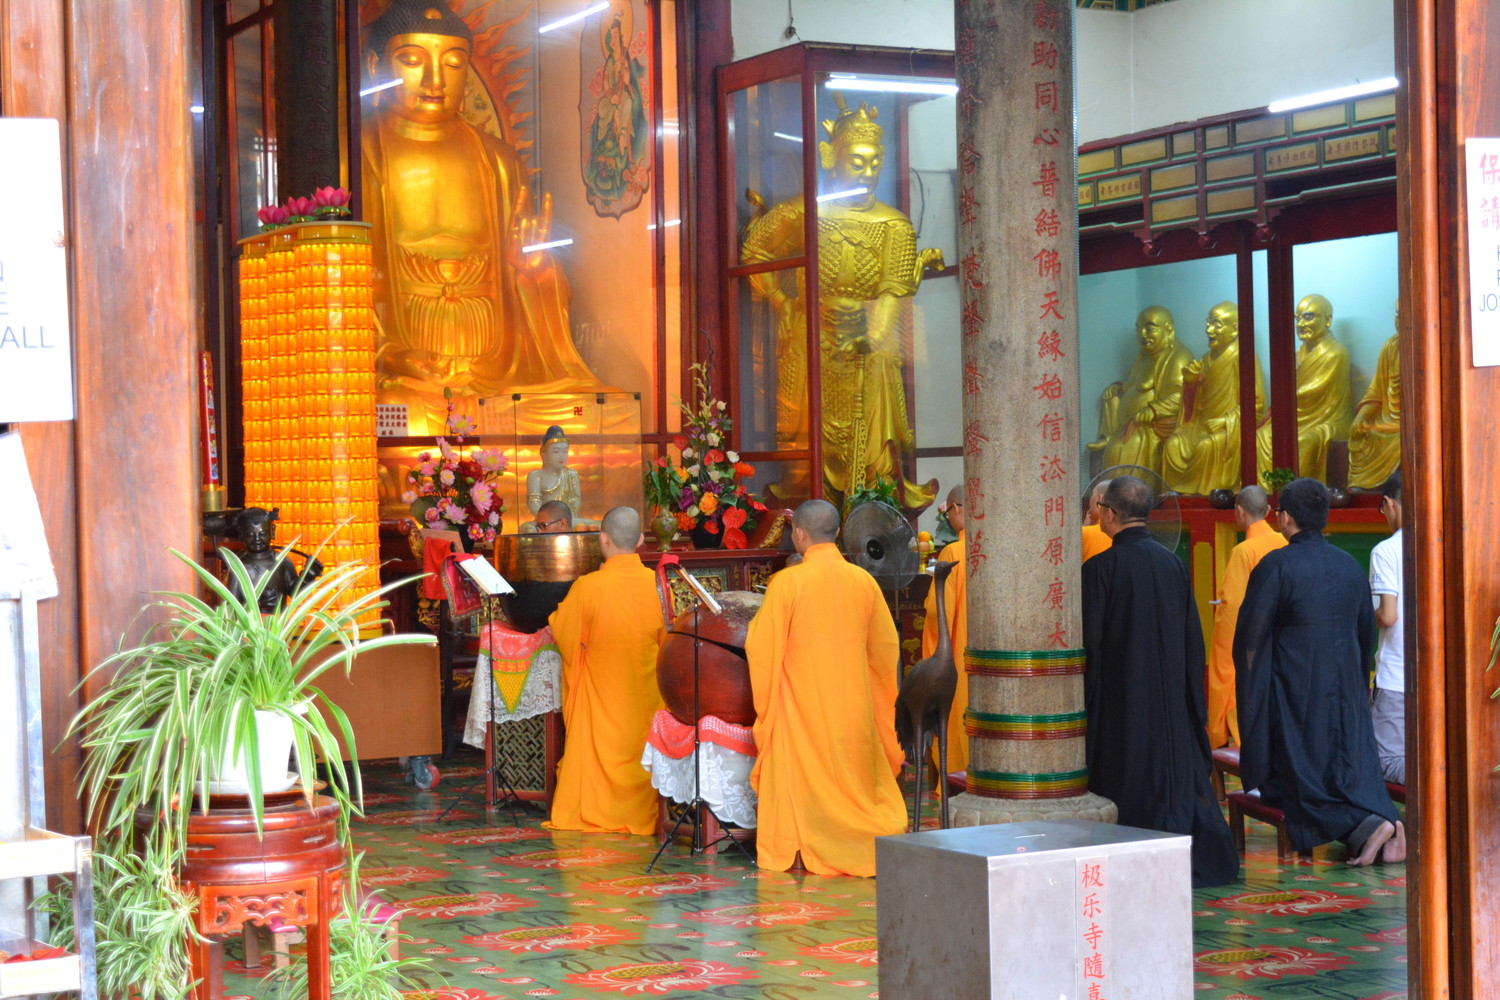 Monks in saffron and black attire sitting on their knees and praying in front of a large statue in a prayer hall